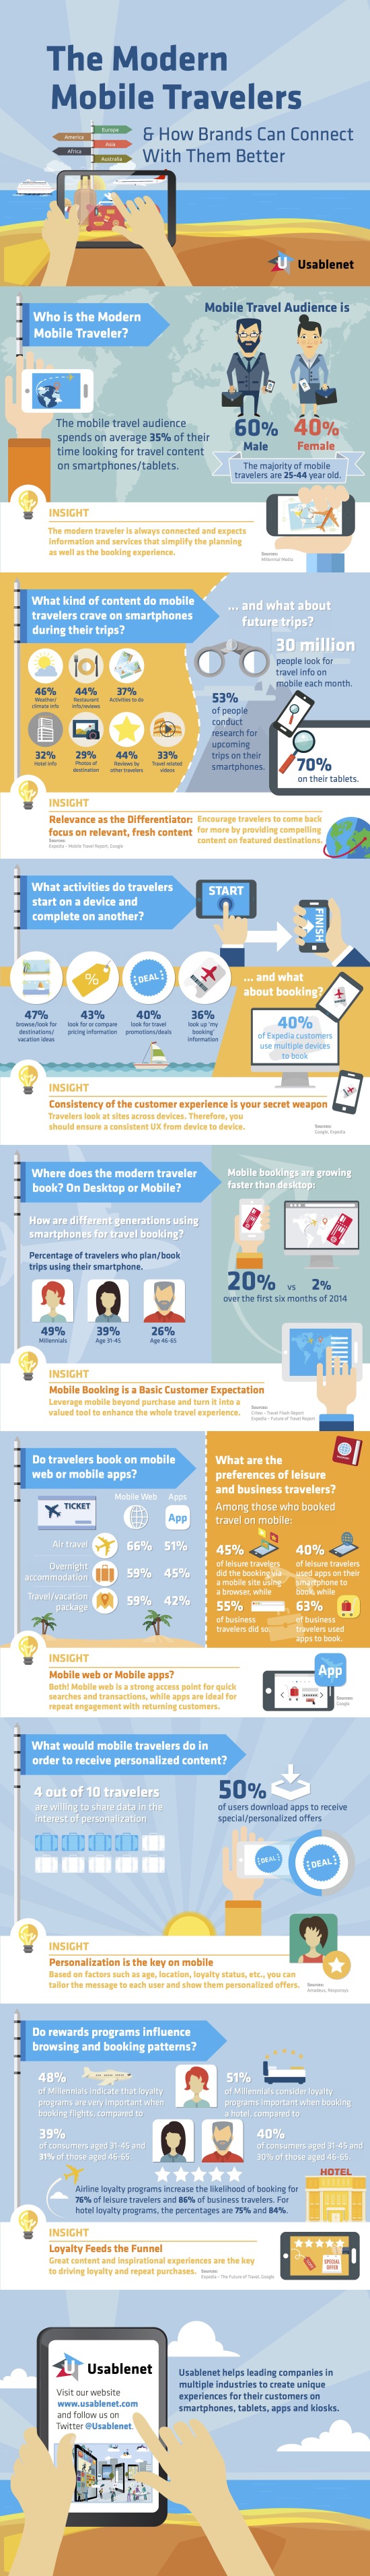 The Modern Mobile Travelers [INFOGRAPHIC]